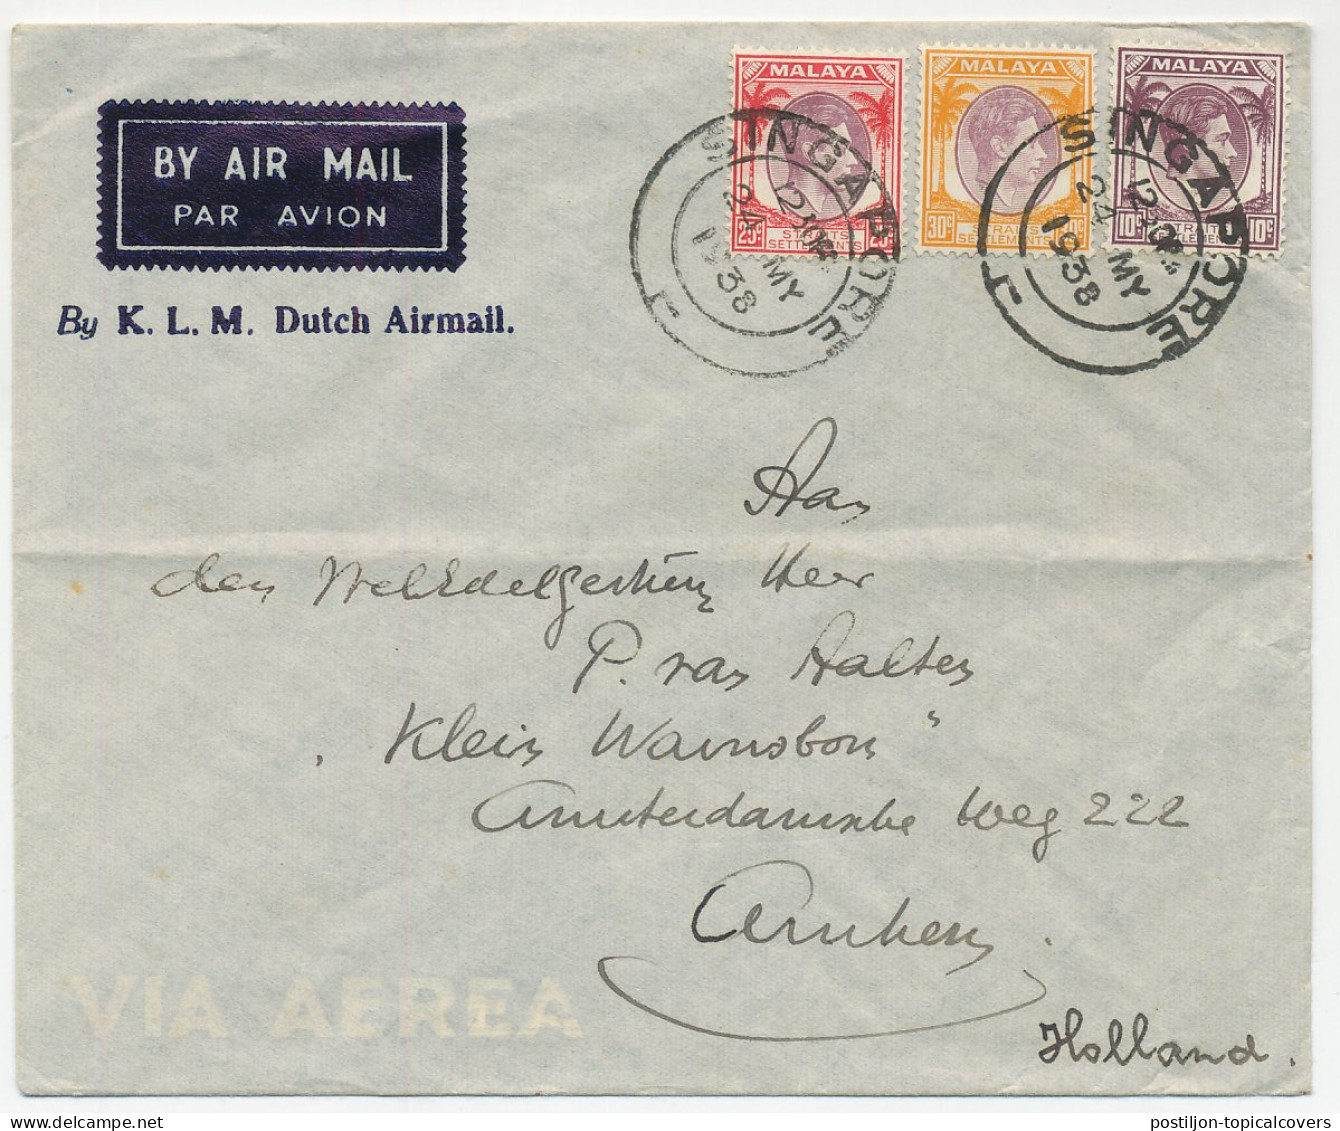  Cover / Postmark Singapore - Malaya - Netherlands 1938 By-KLM-Dutch-Airmail  - Airplanes